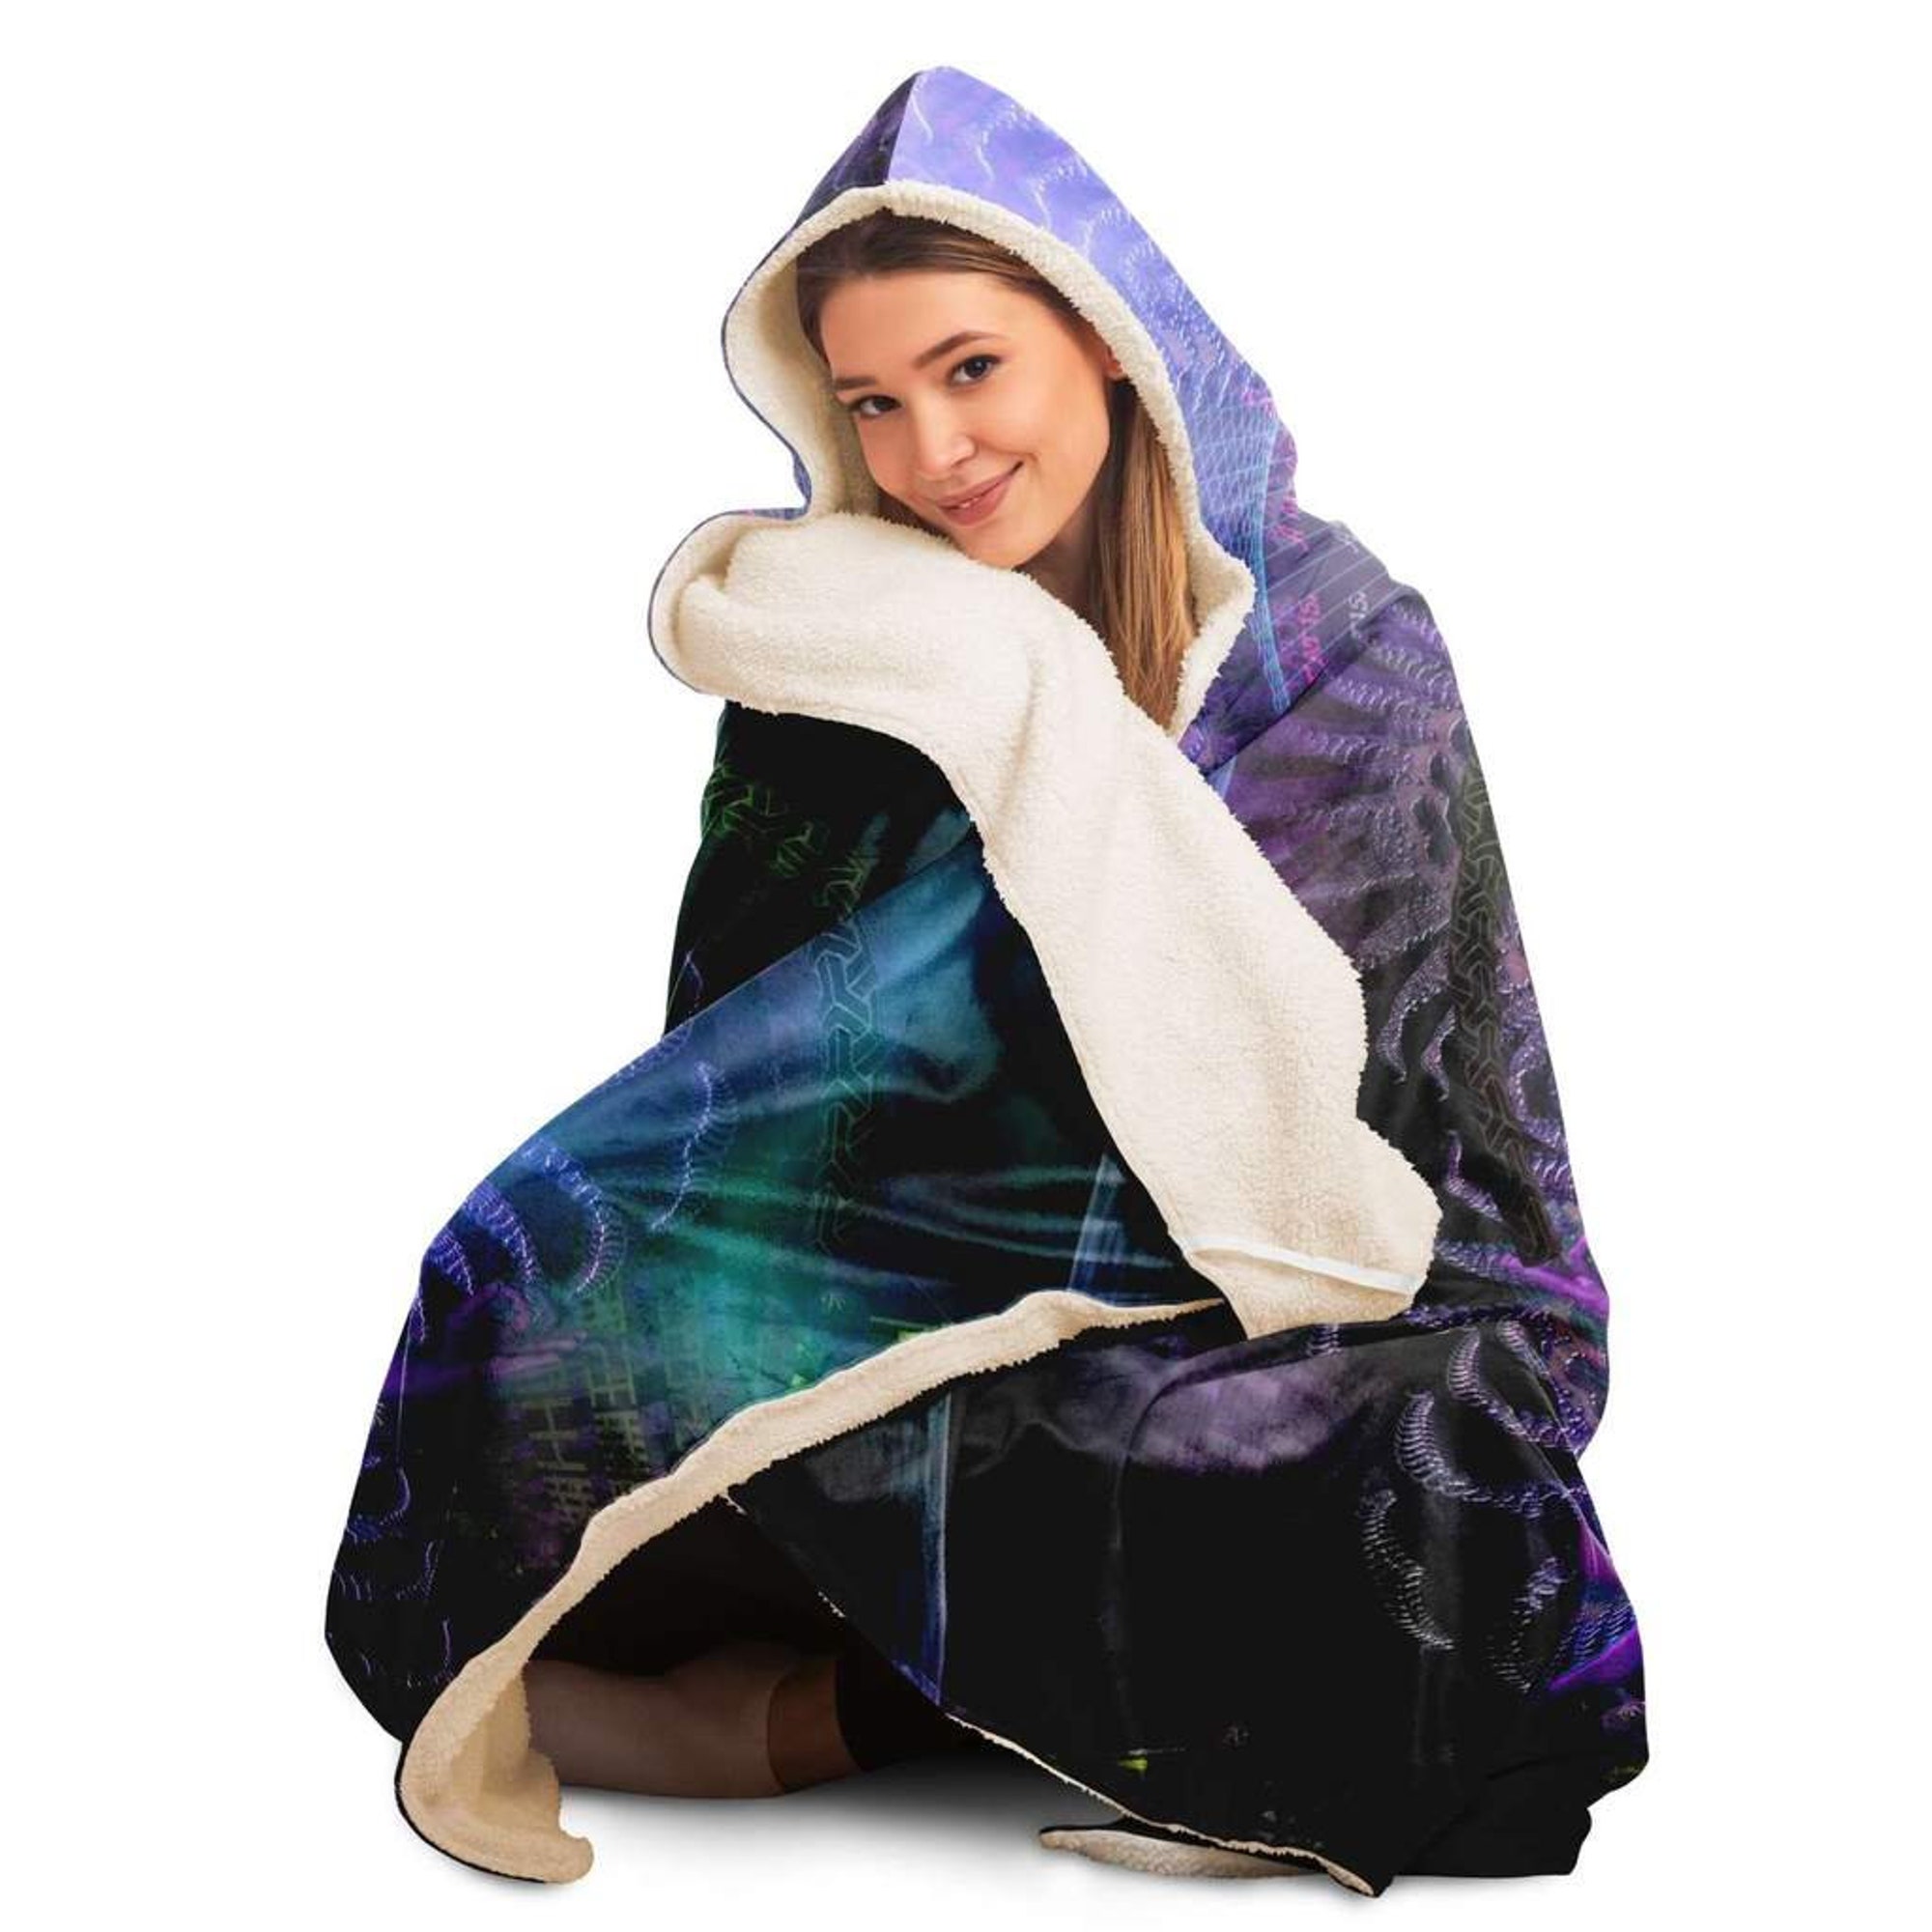 Discover Luminous Presence Hooded Blanket Sherpa